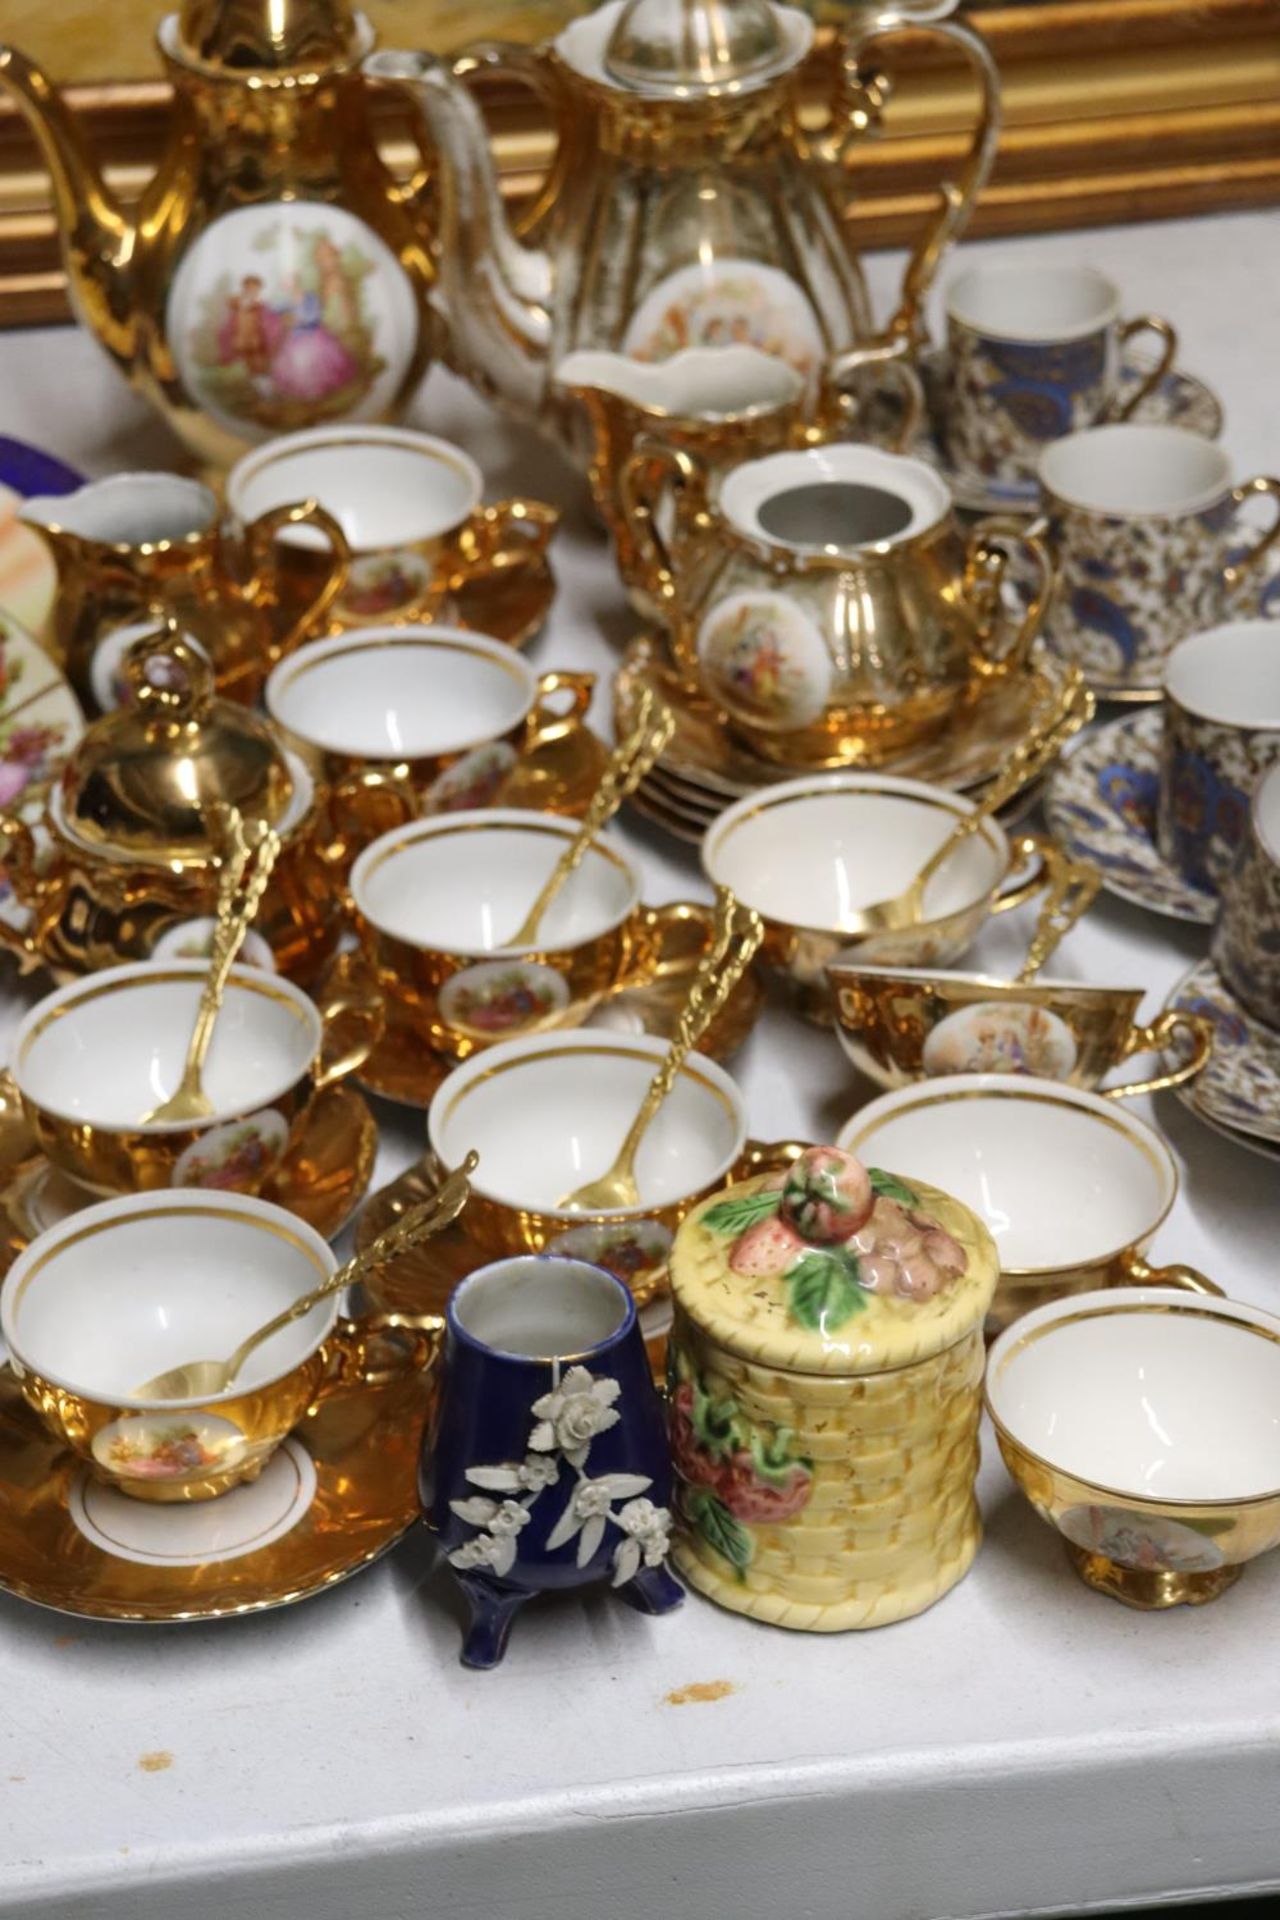 A QUANTITY OF VINTAGE TEAWARE TO INCLUDE GERMAN GILT WITH A CLASSICAL DESIGN, COFFEE POTS, SUGAR - Image 3 of 6